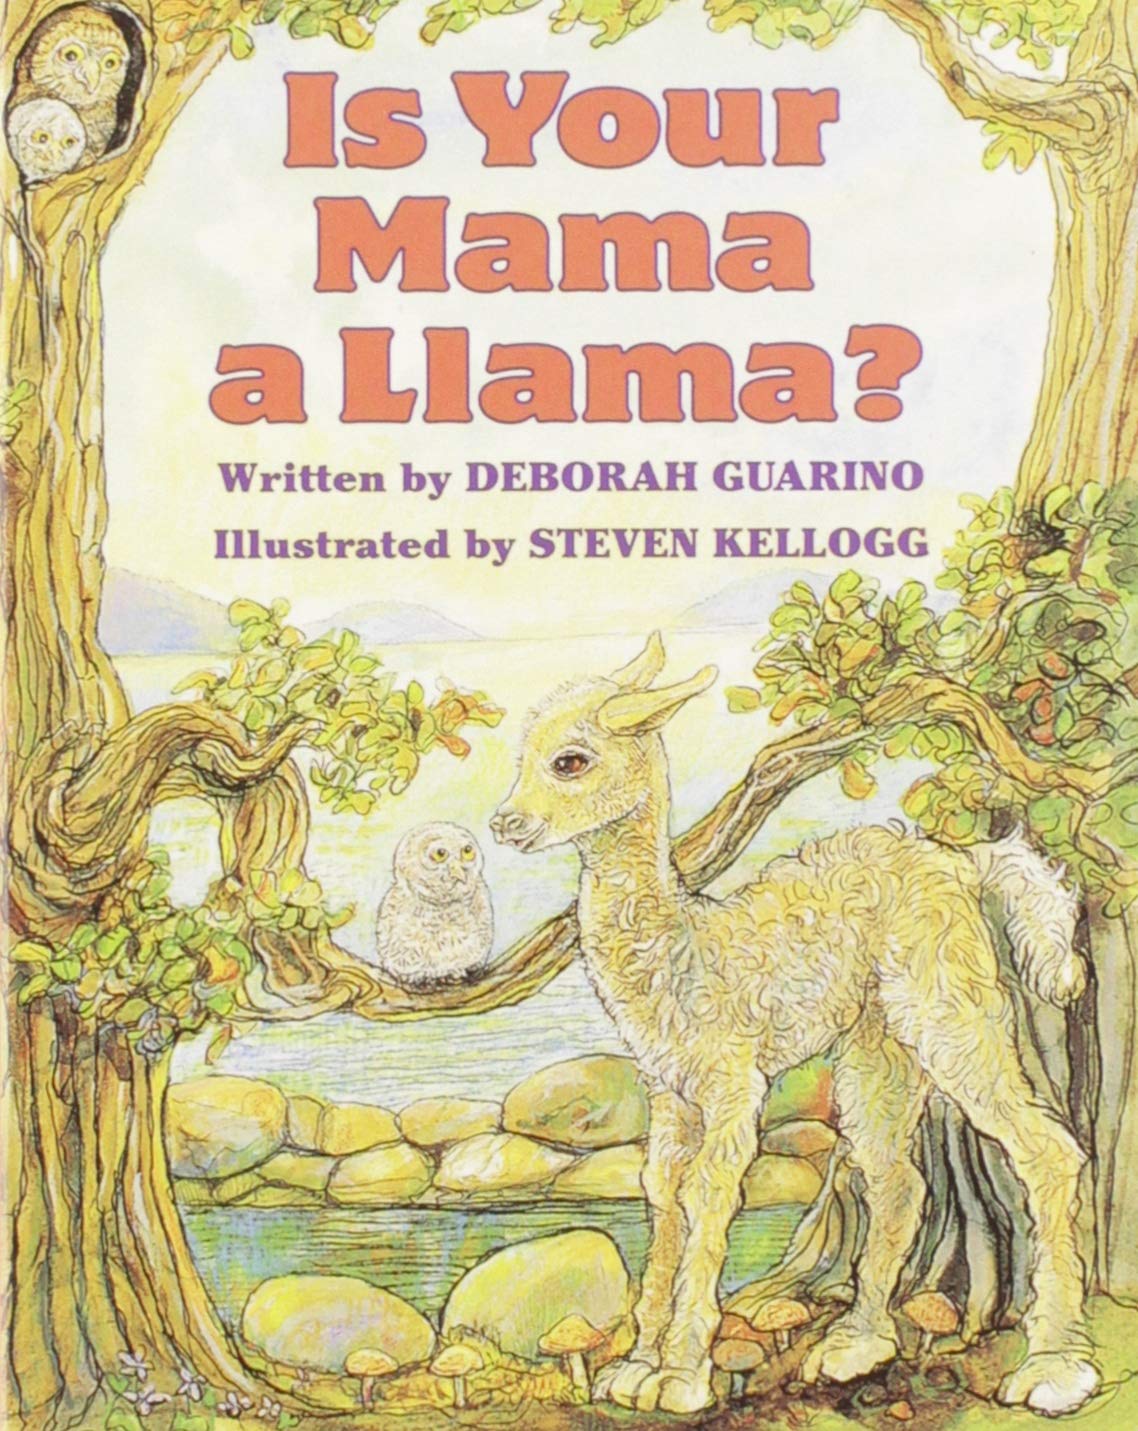 Is your mama a llama?